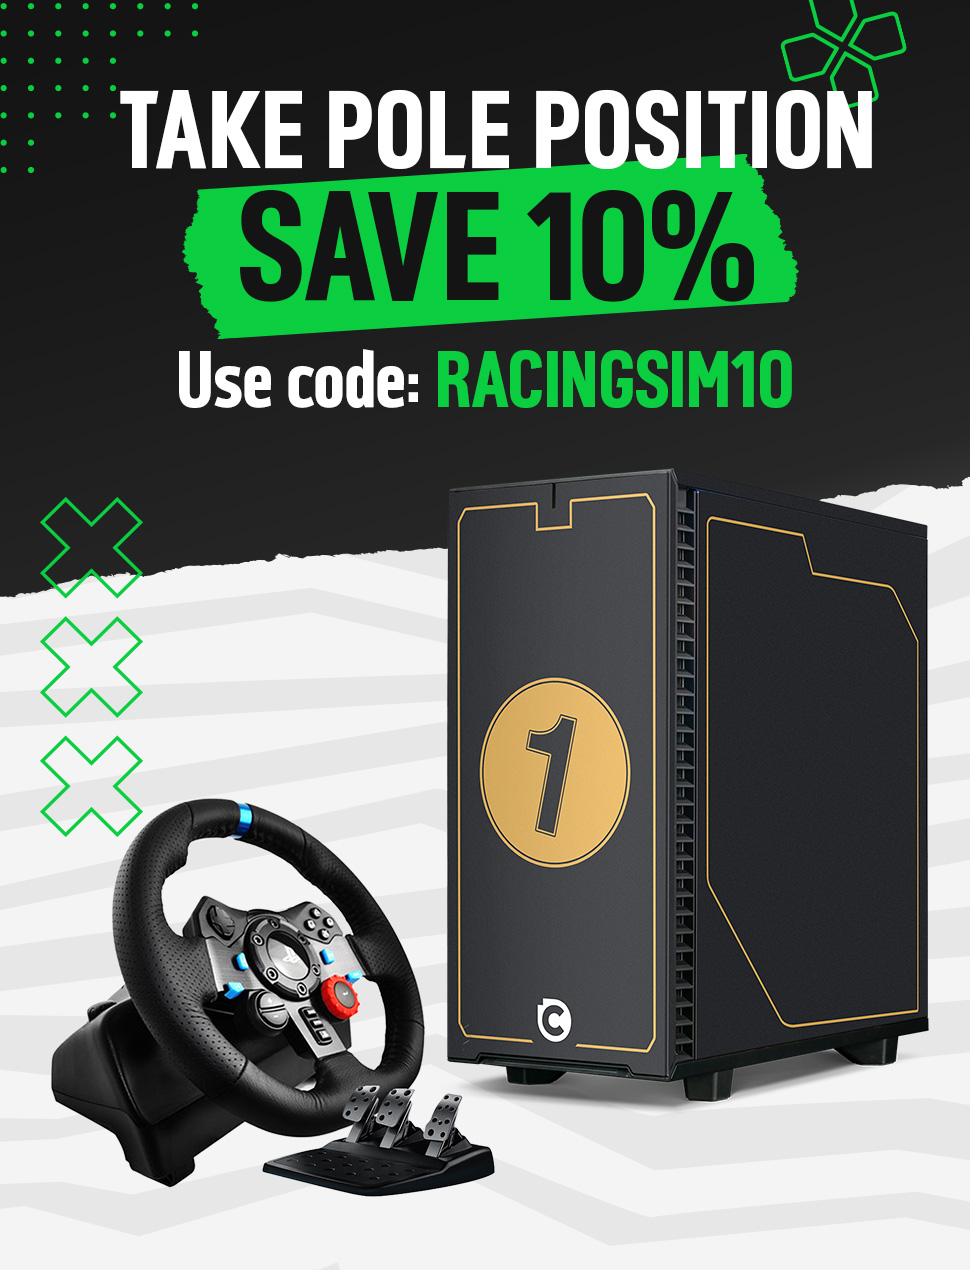 Racing SIM Offers and Deals at CCL